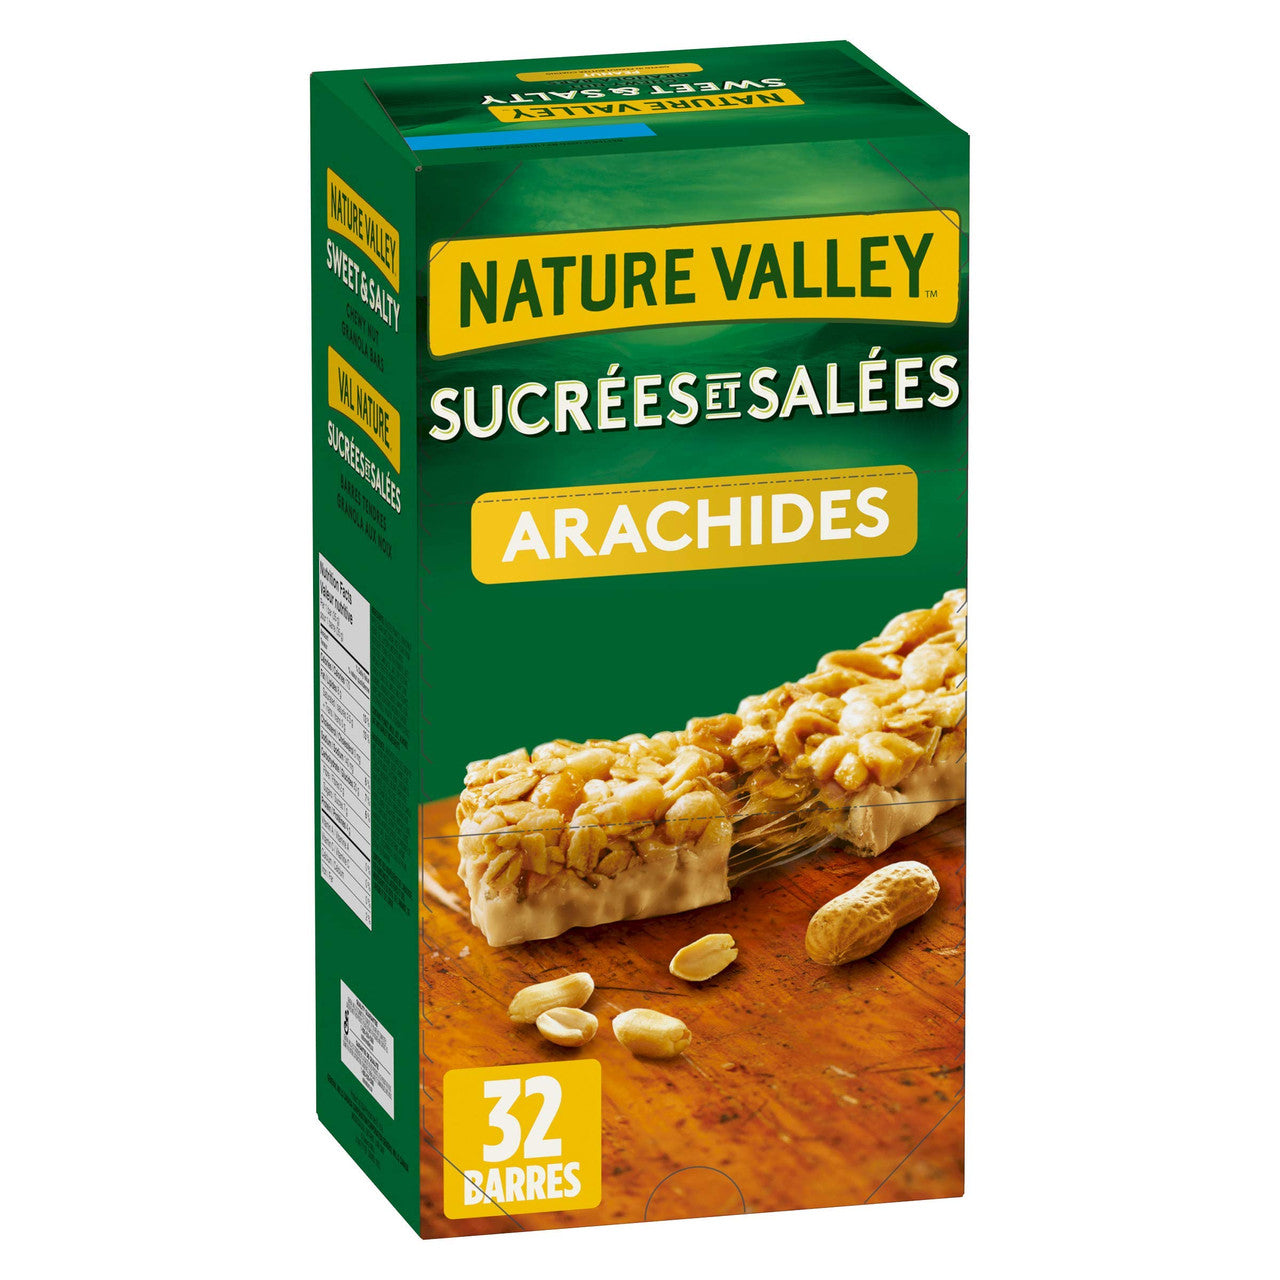 Nature Valley Sweet and Salty Peanut Chewy Nut Bars, 32pk, 1.1kg/2.4 lbs.,{Imported from Canada}